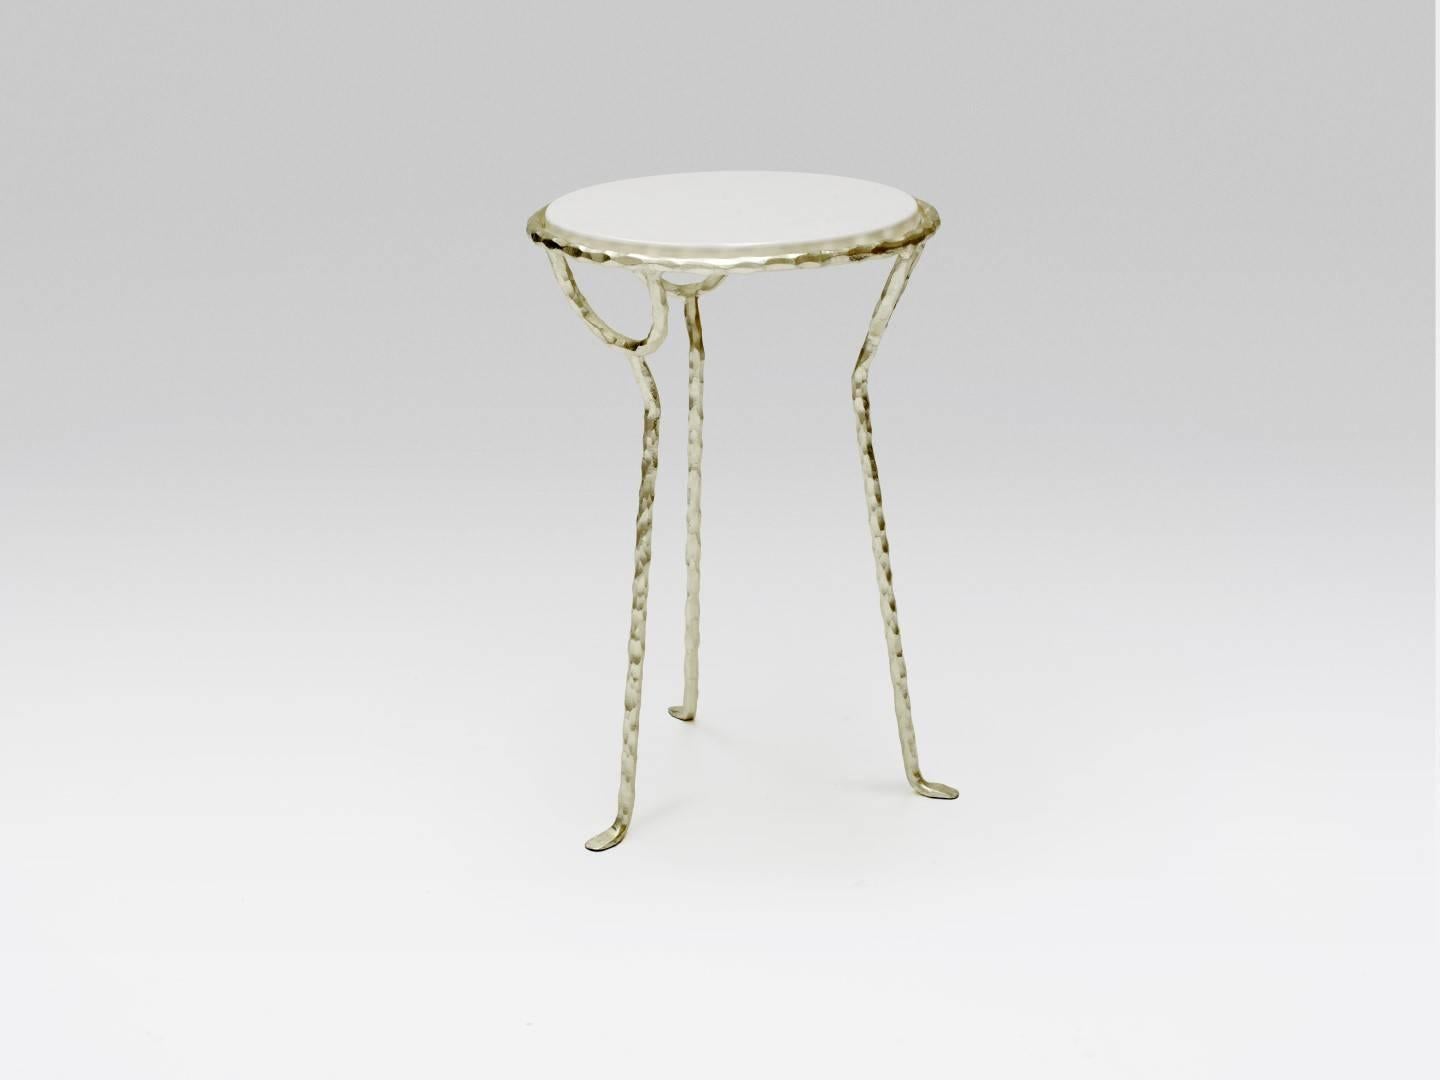 Garouste and Bonetti.
Side table 'Mara (round)',
1994.
Marble, gilded fer forgé.
Measures: H 60 x diam. 40 cm / H 23.6 x diam. 15.7 in.
David Gill Gallery
For EU buyers this piece is subject to a 20% VAT tax, which will be added to the price after